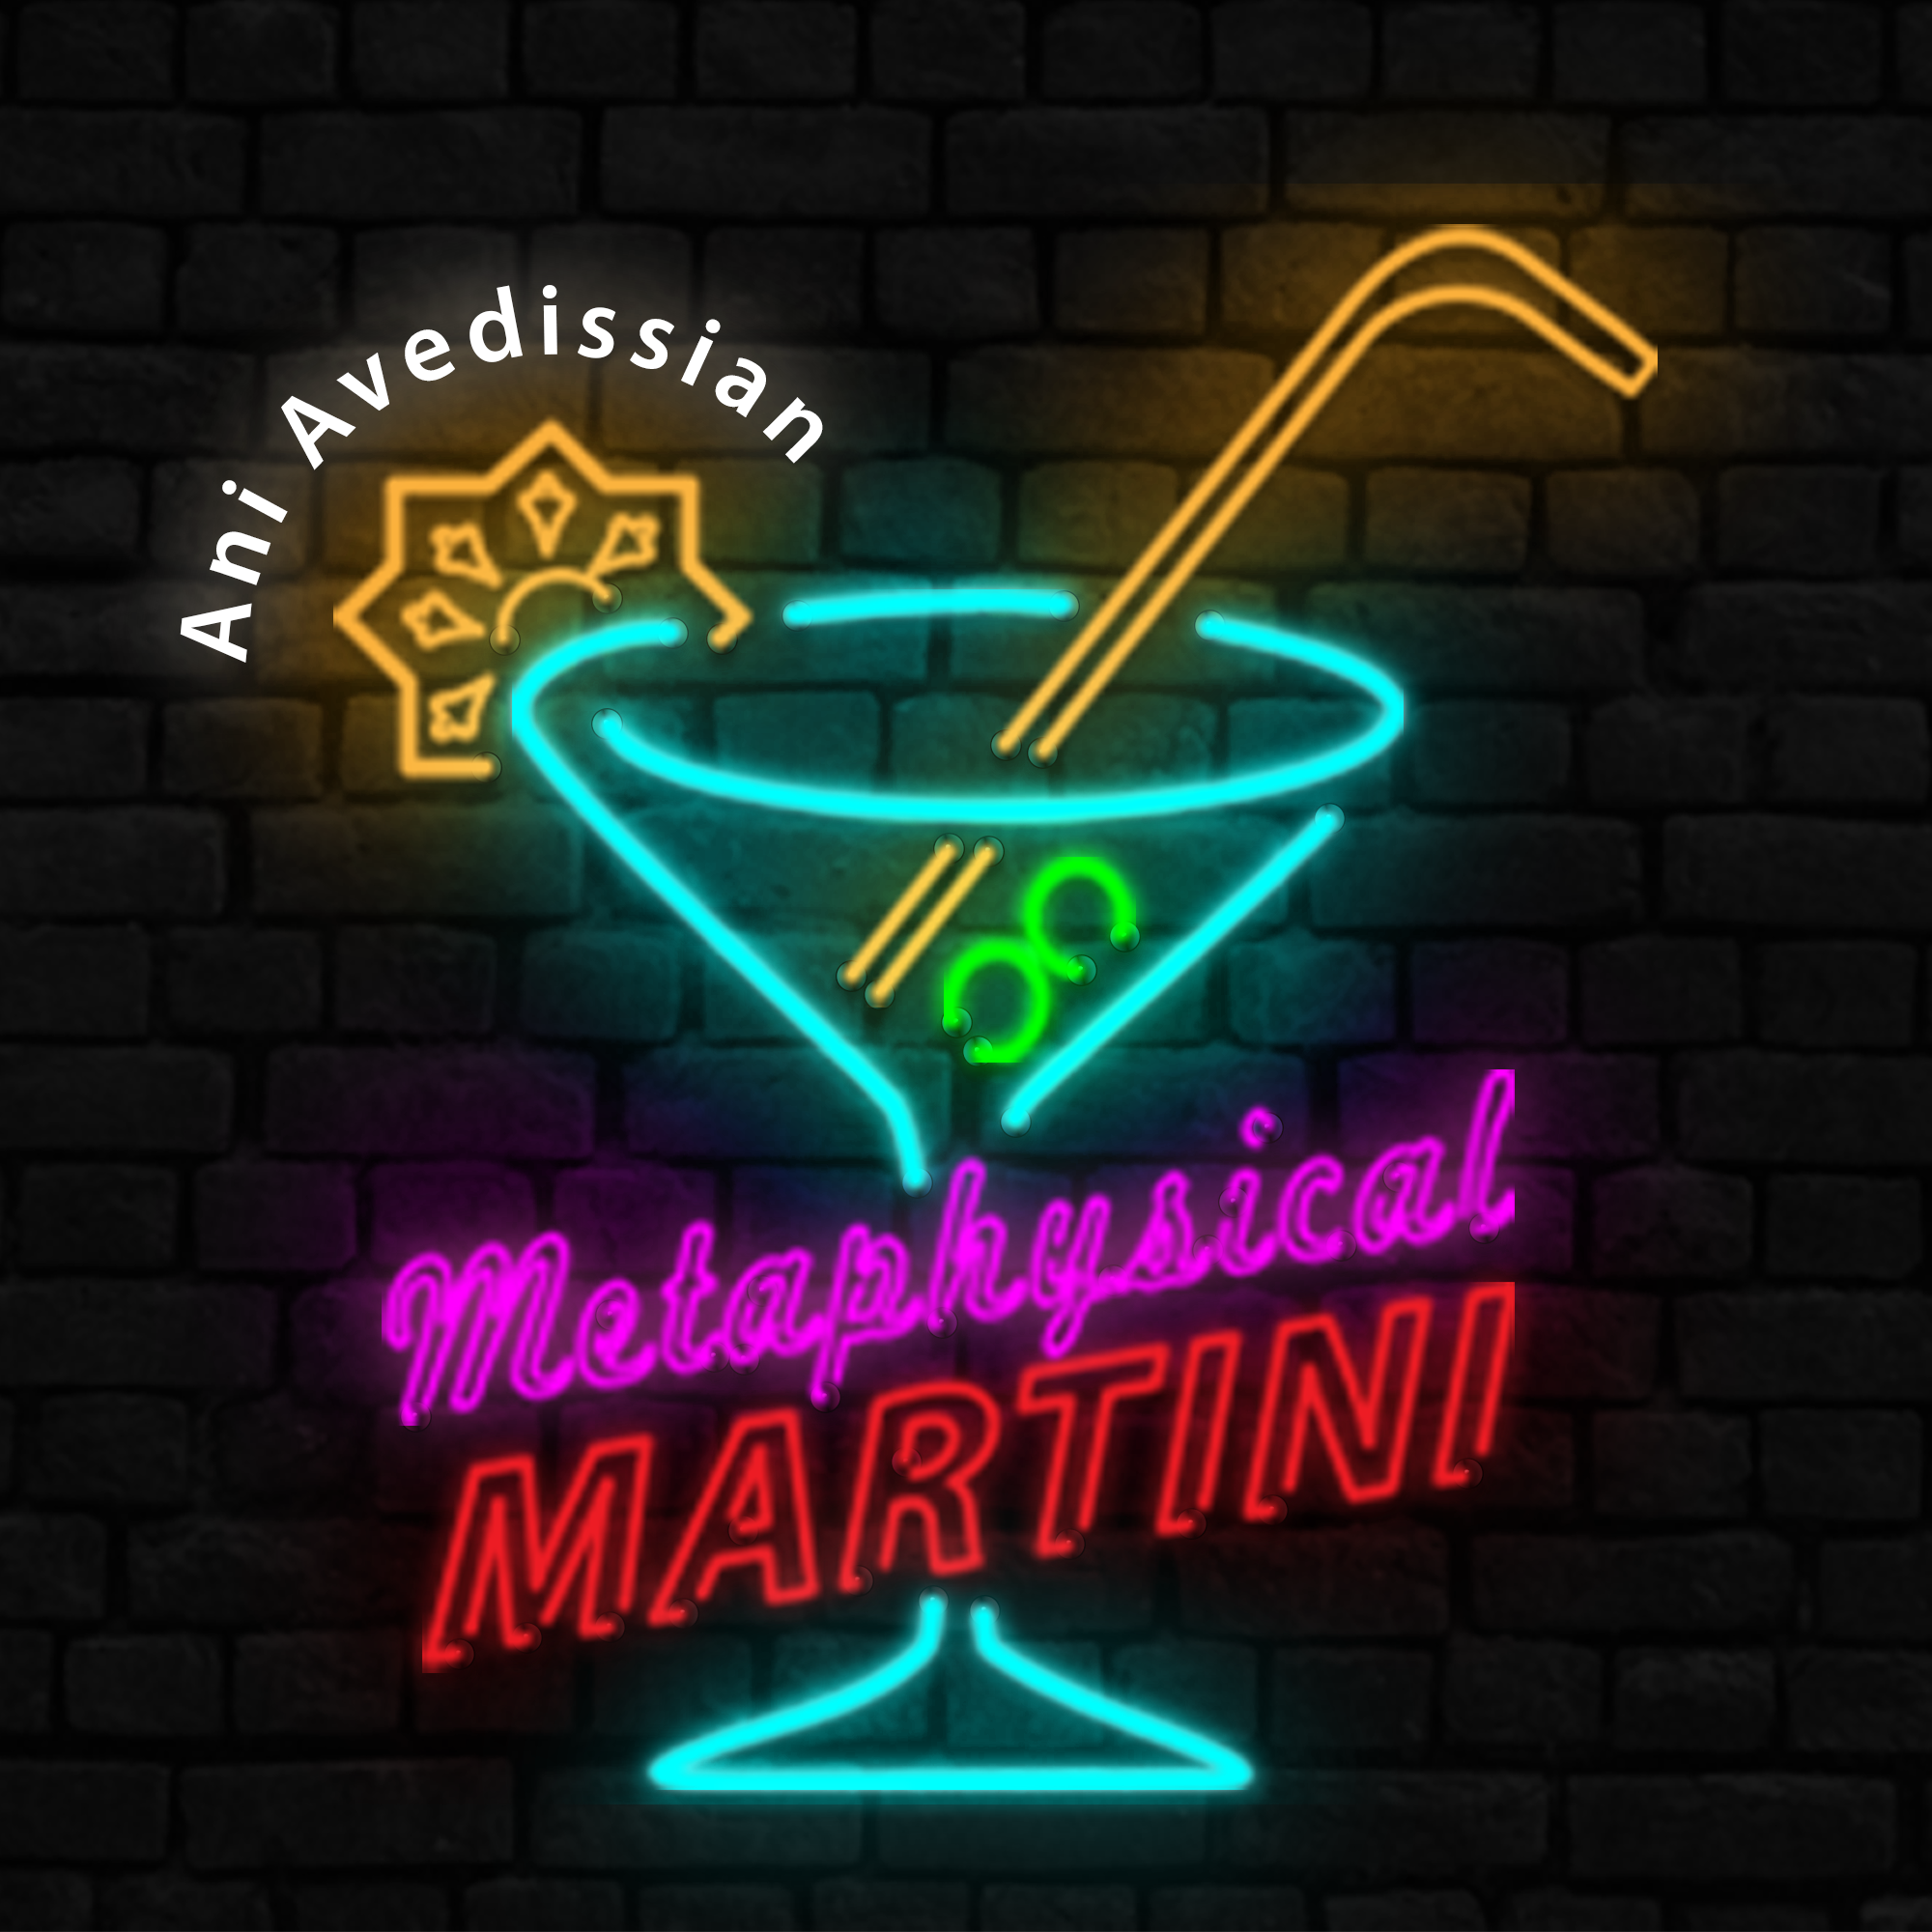 "Metaphysical Martini" 11/25/2020 To live in fear and falsehood is worse than death